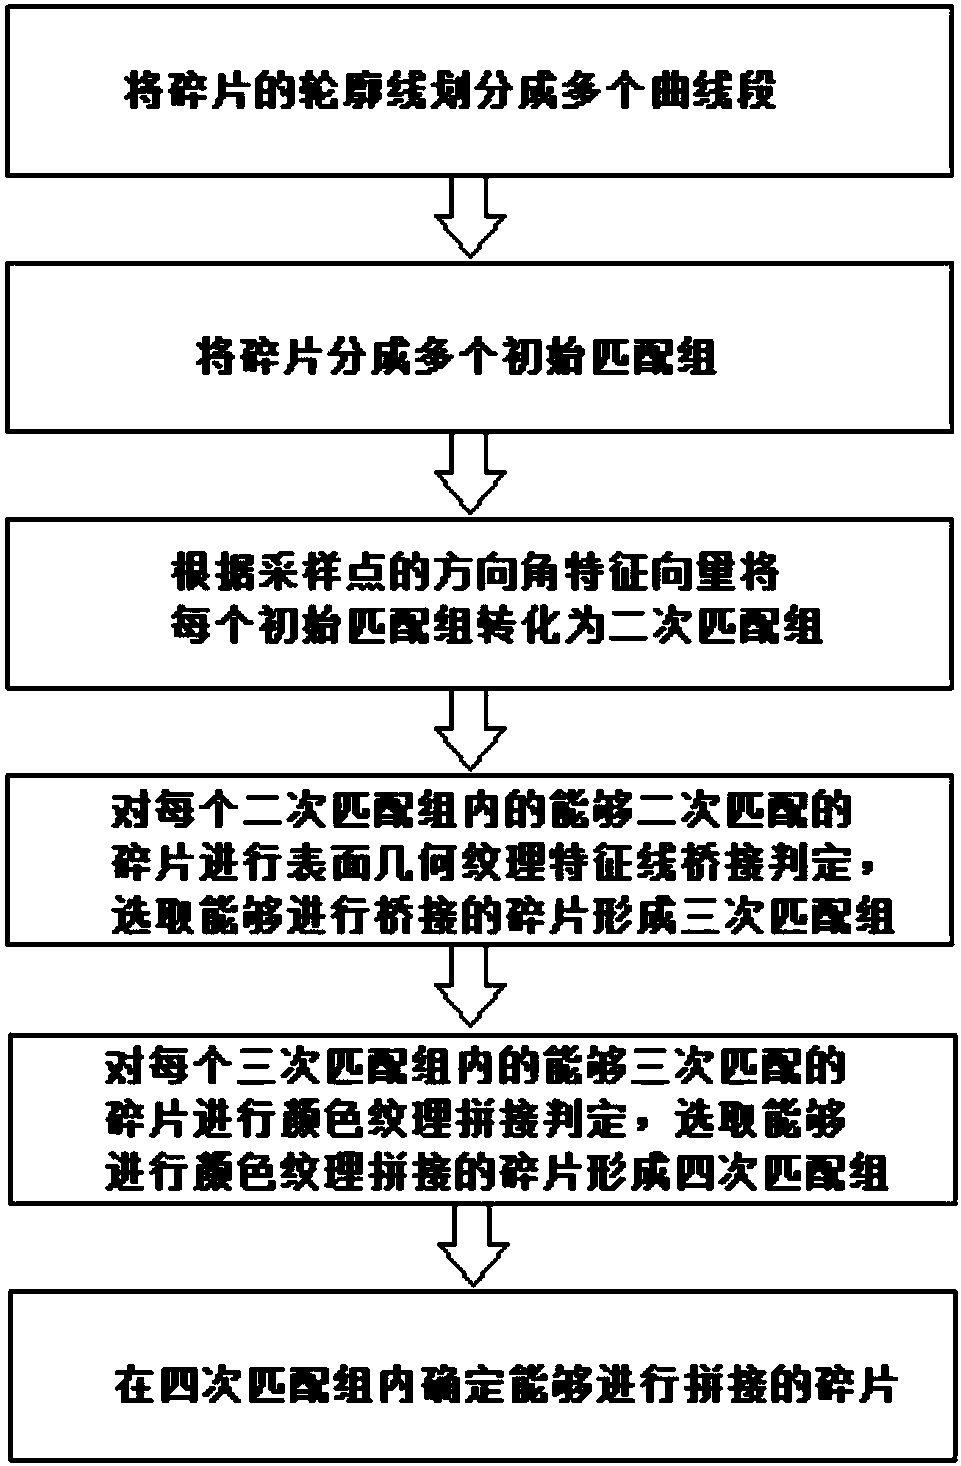 Automatic culture relic fragment splicing method based on adaptive neighbor matching